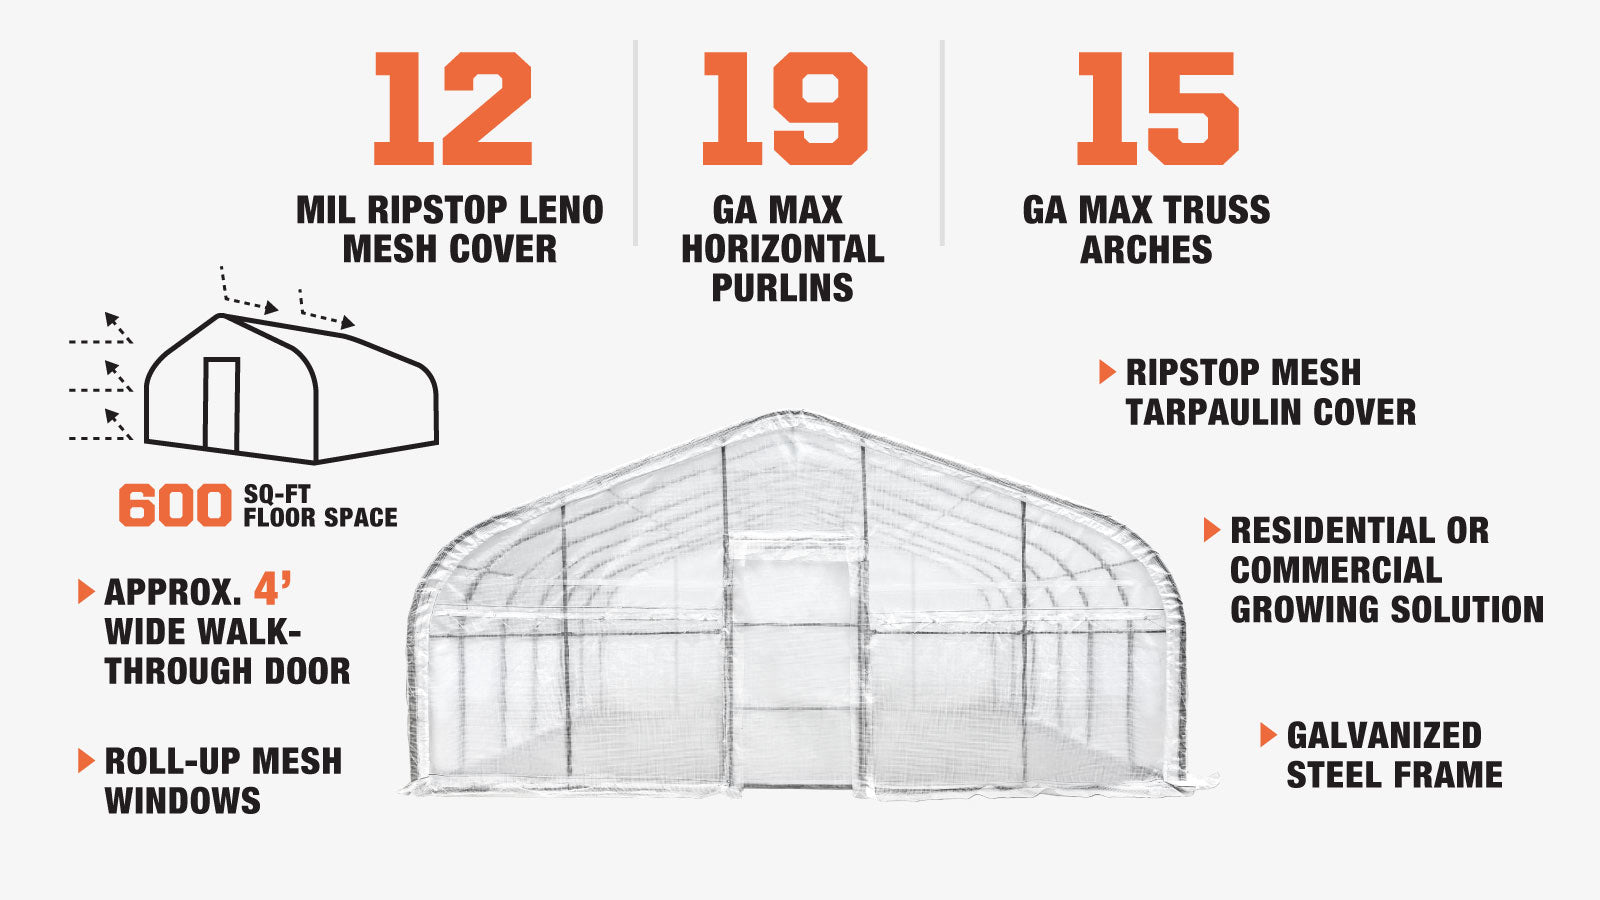 TMG Industrial 20' x 30' Tunnel Greenhouse Grow Tent with 12 Mil Ripstop Leno Mesh Cover, Cold Frame, Roll-up Windows, Peak Ceiling Roof, TMG-GH2030-description-image